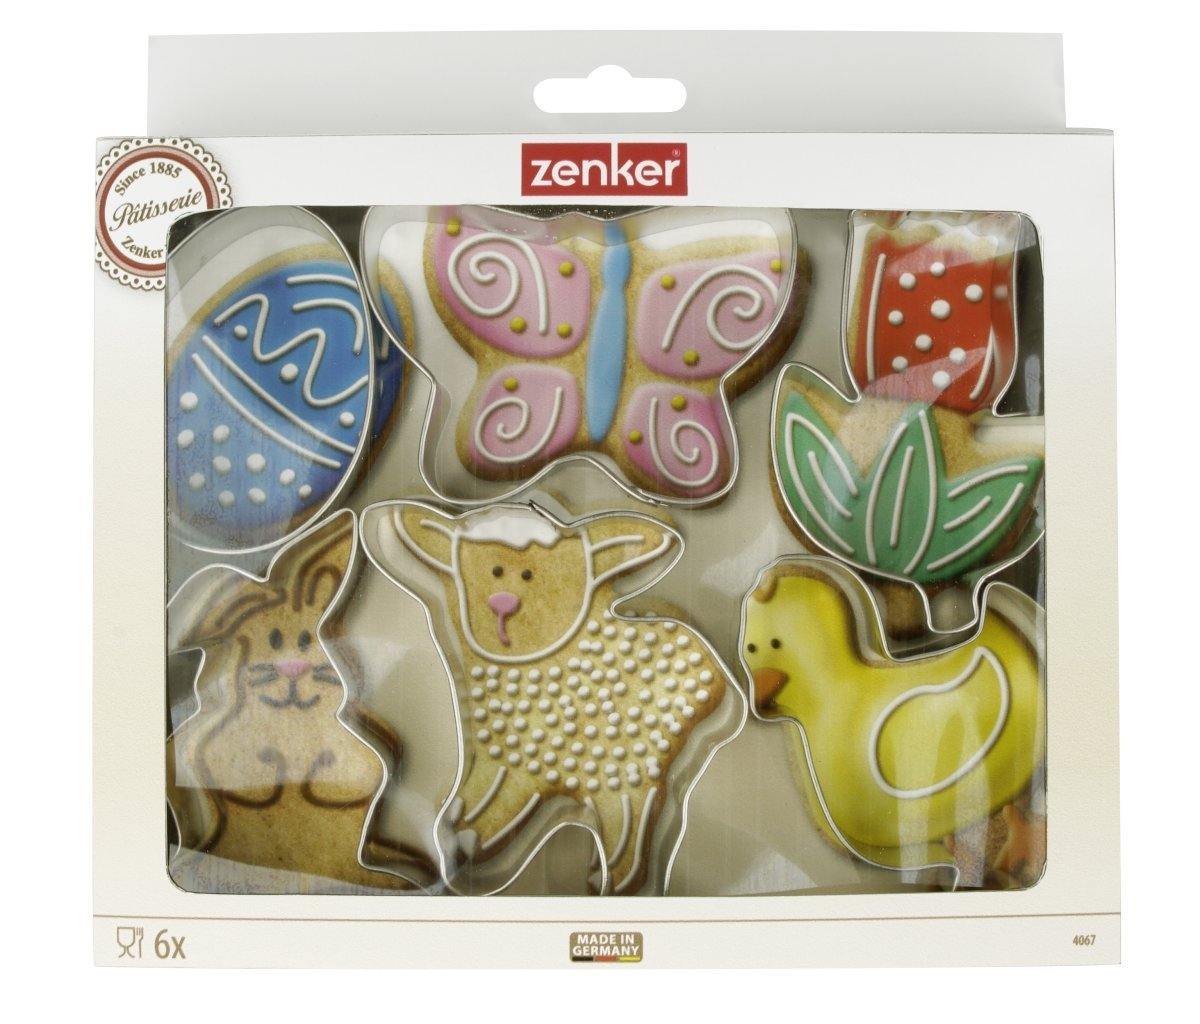 Dr. Oetker "Patisserie" Easter Cookie Cutters, 5-9cm, Set of 6 - Whole and All